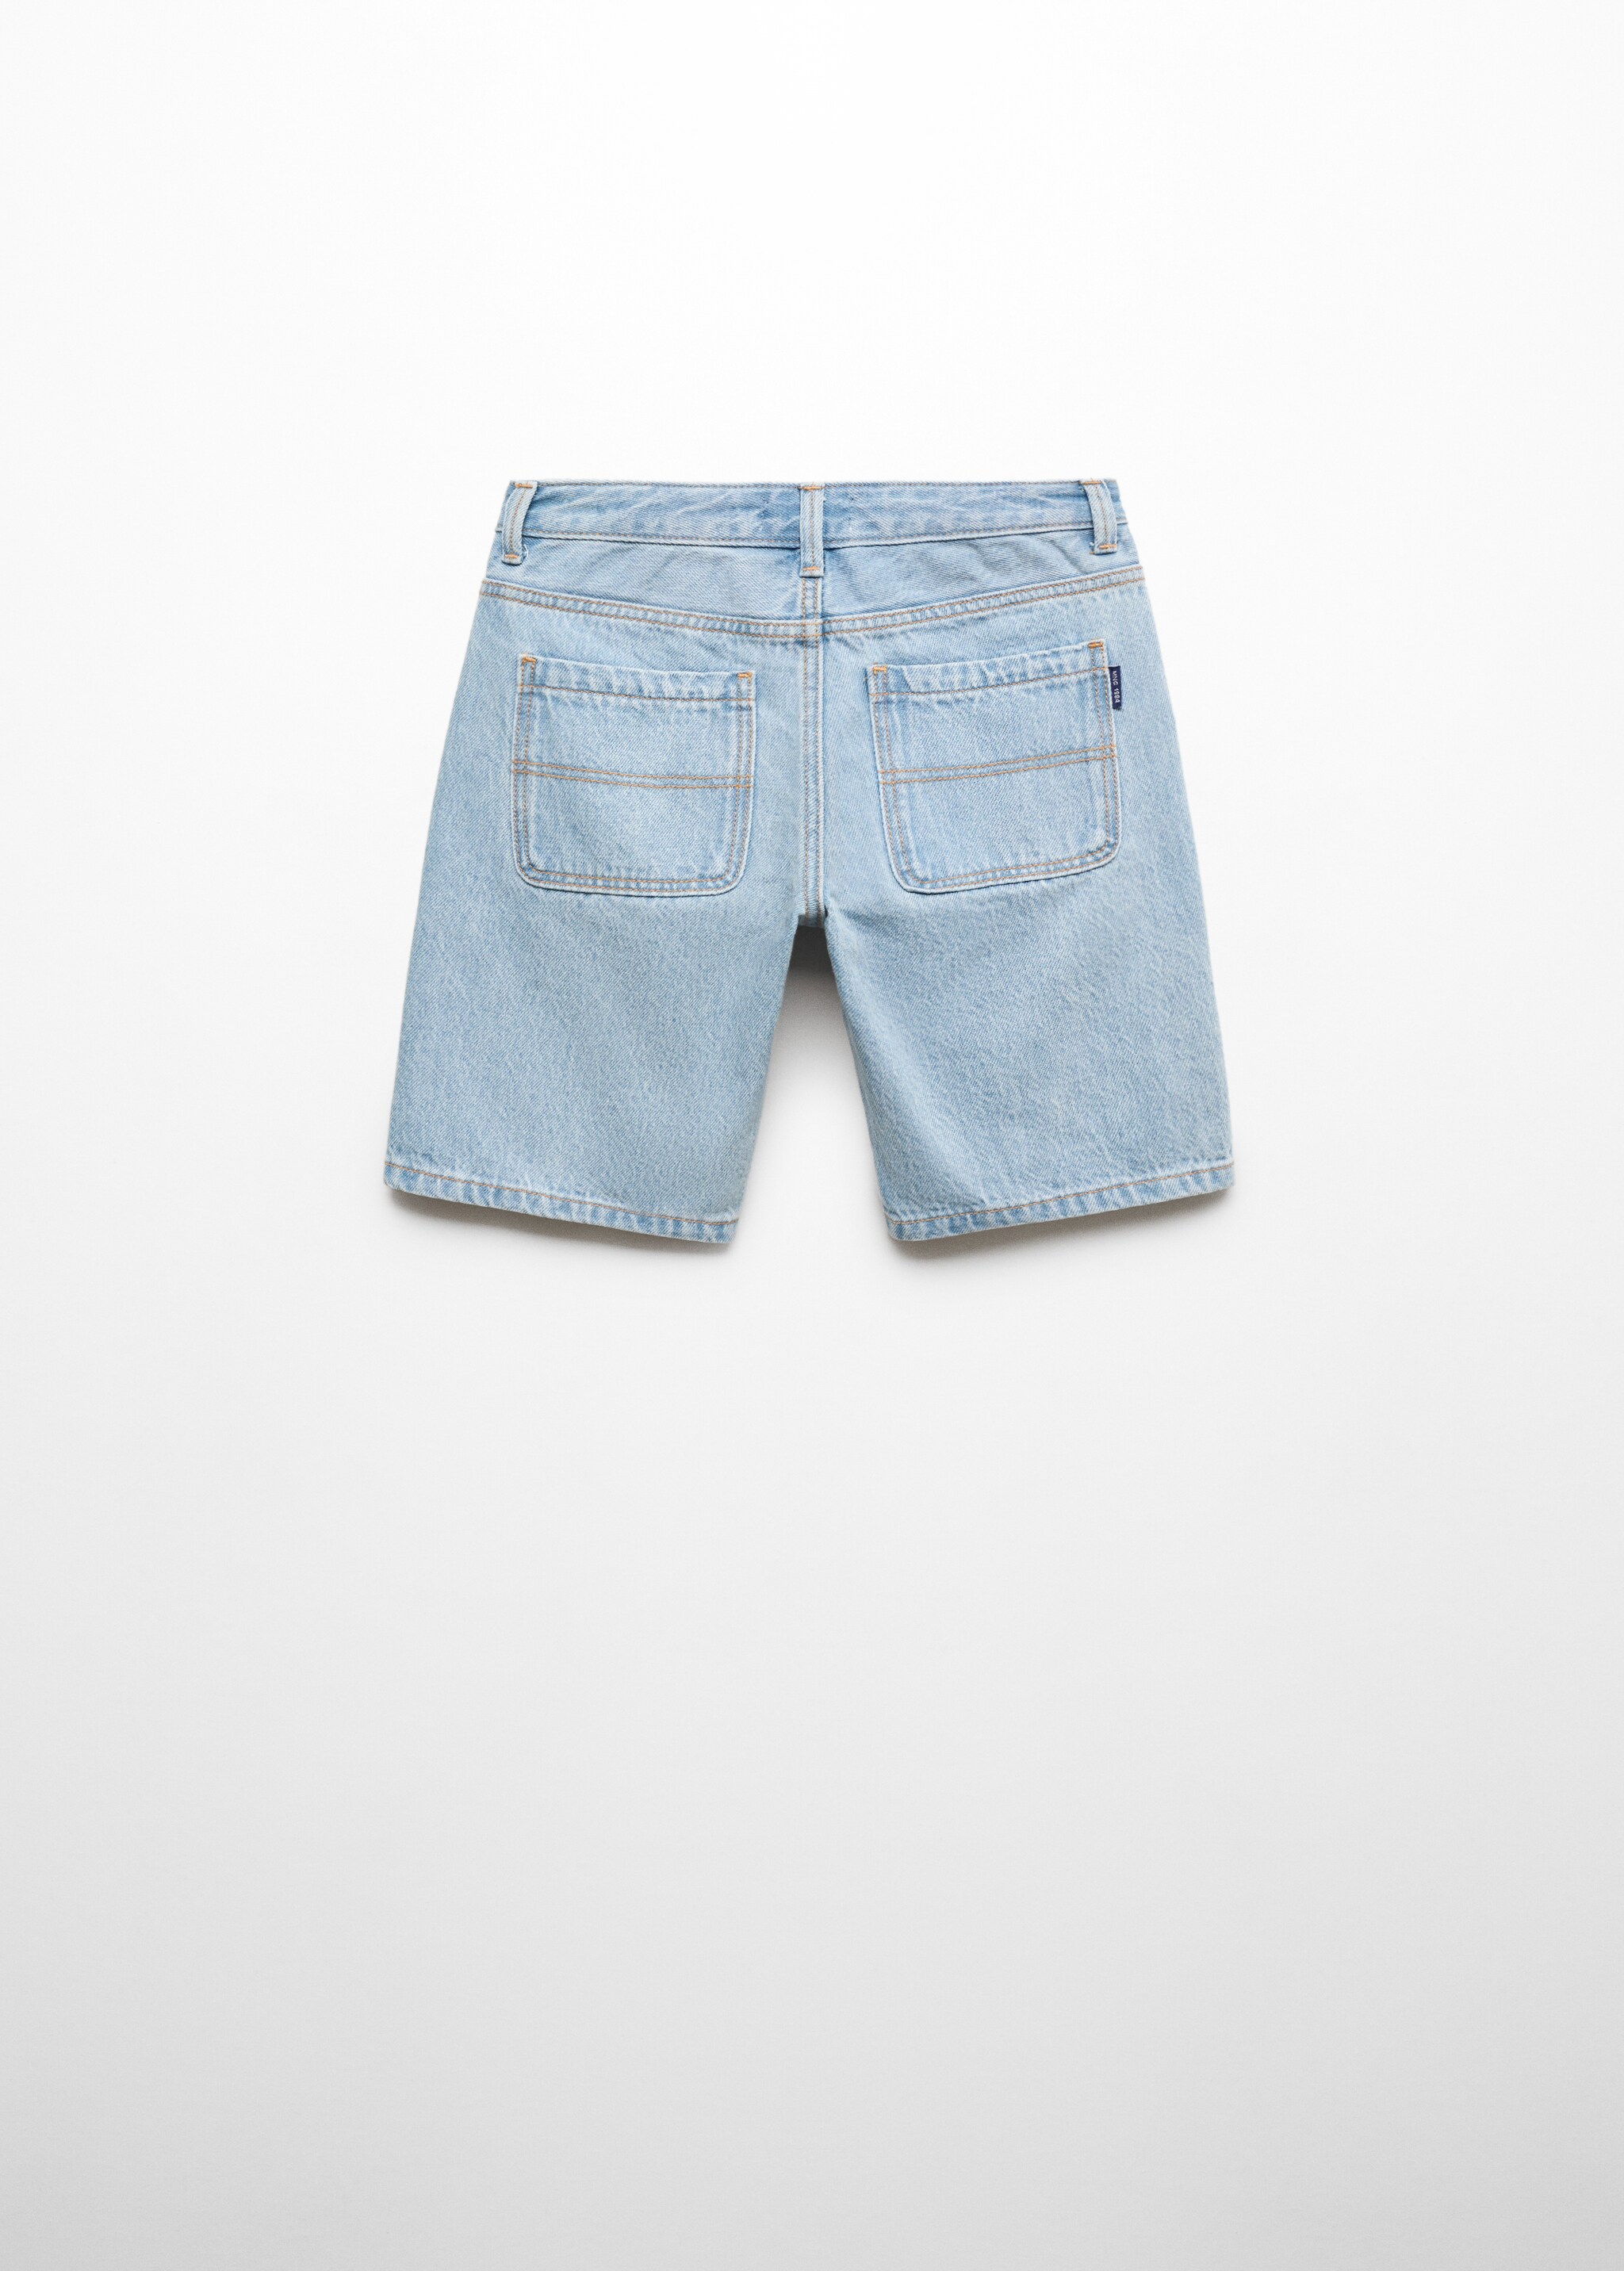 Cotton denim shorts - Reverse of the article